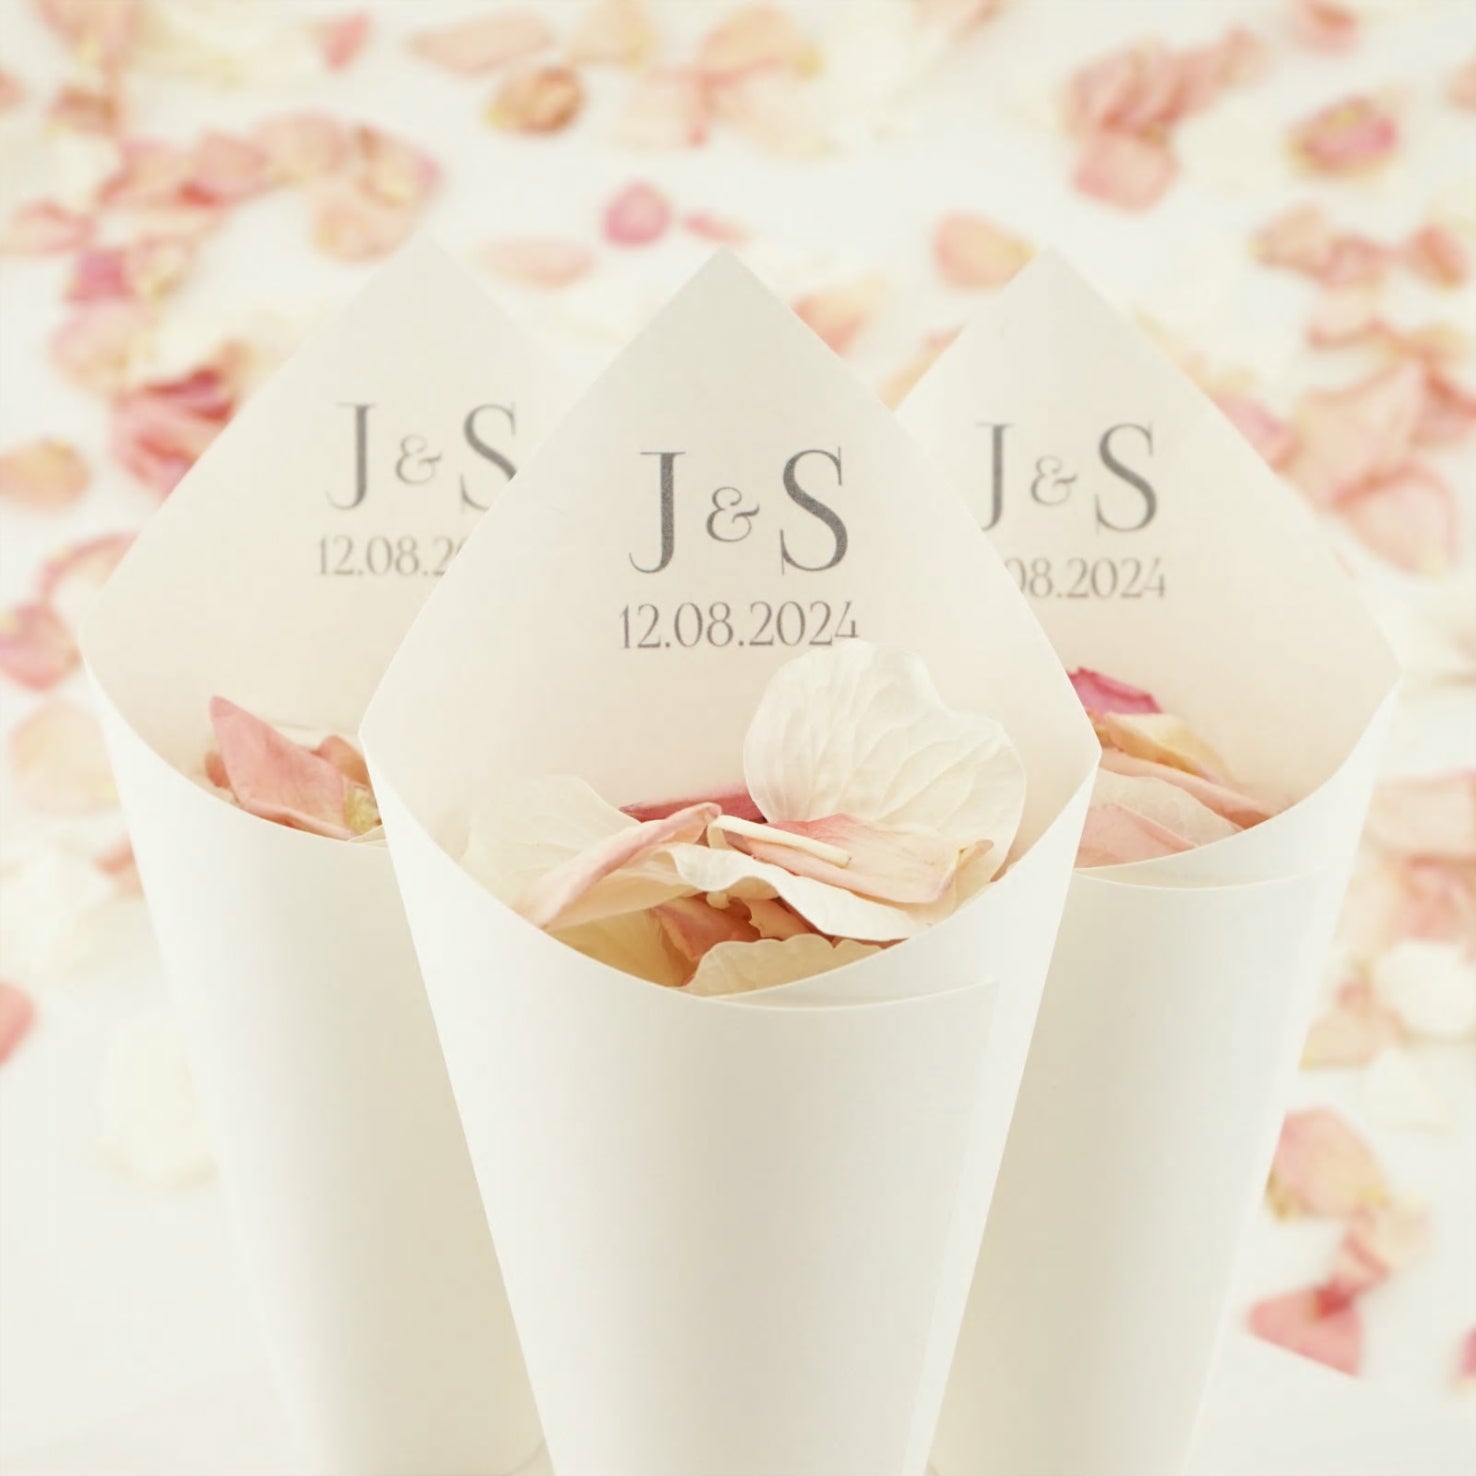  52 Pack Mix Biodegradable Confetti, Dried Flower Petals, Real  Rose Petals for Weddings, Valentine's Day Gifts, Wedding Confetti, Wedding  Send Off Ideas, Flower Girl Dinner Table Centerpieces : Home & Kitchen